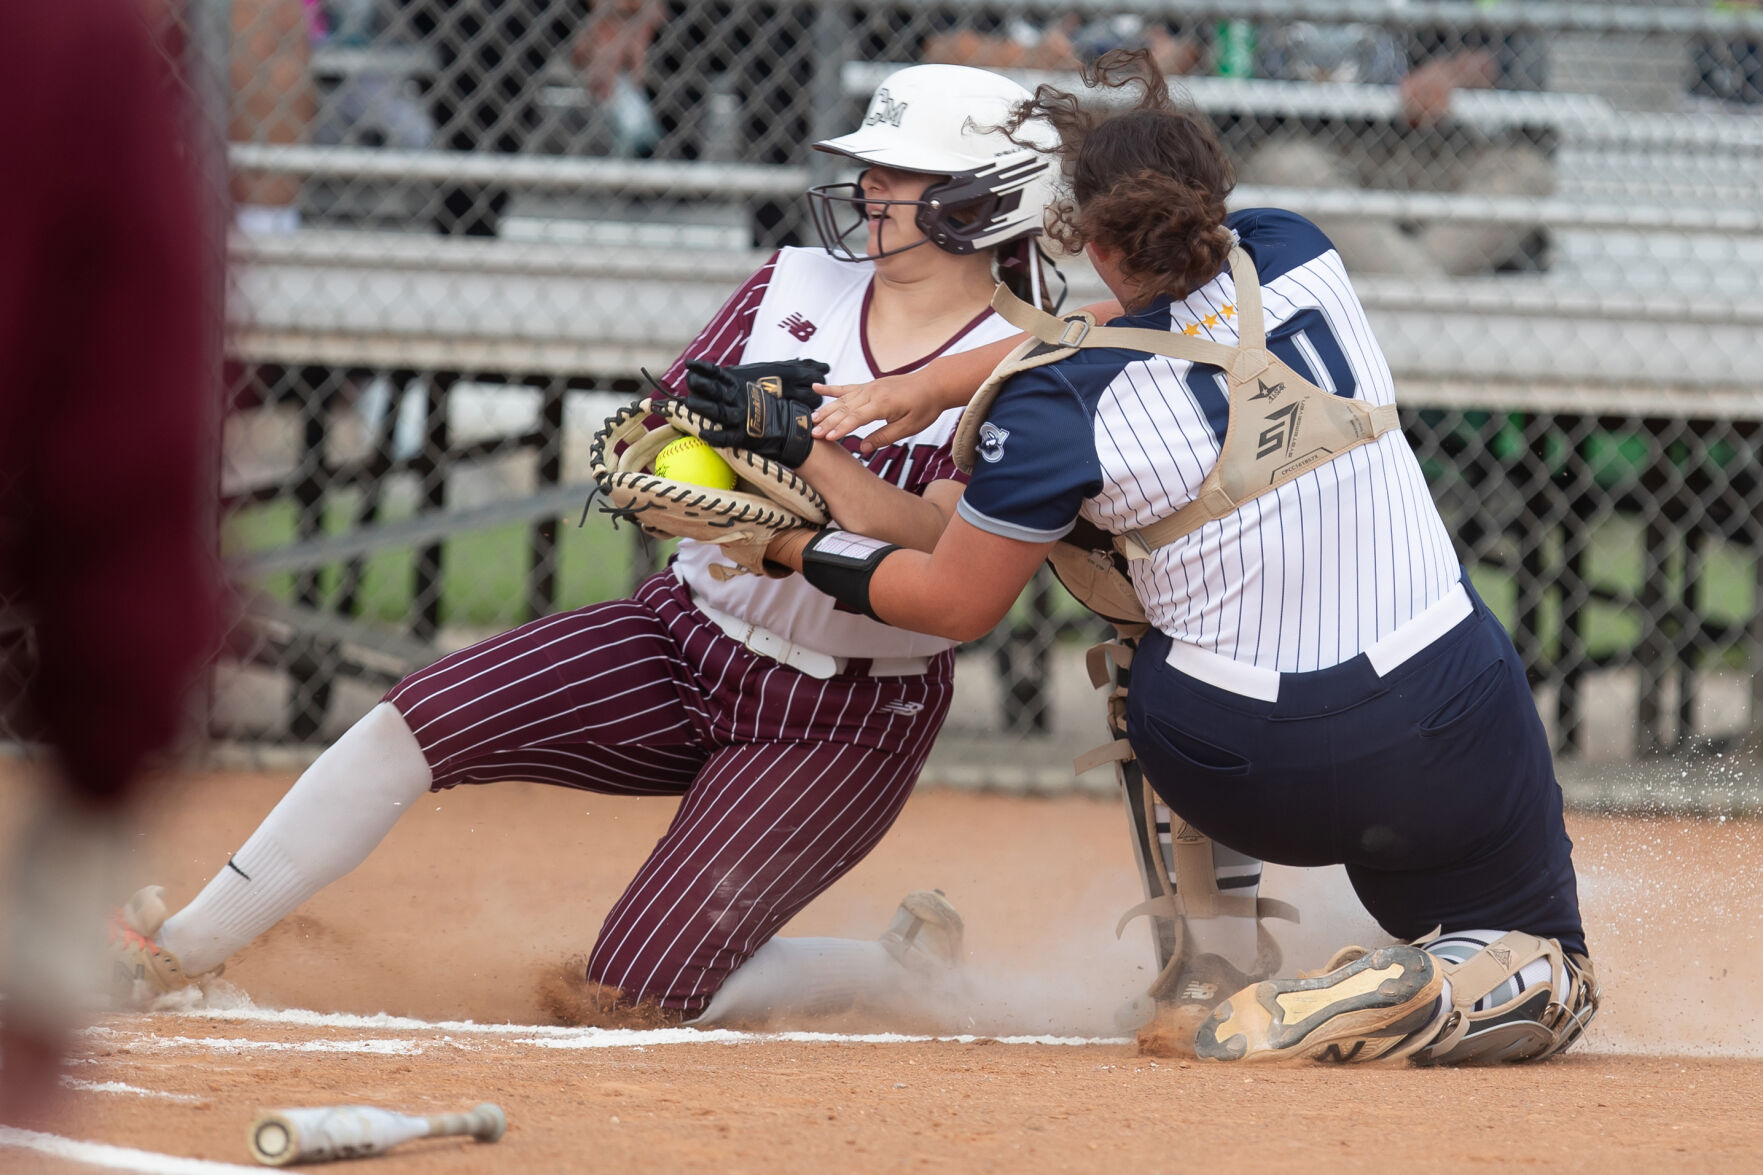 A&M Consolidated dominates Shoemaker in Class 5A playoff opener with 17-4 win